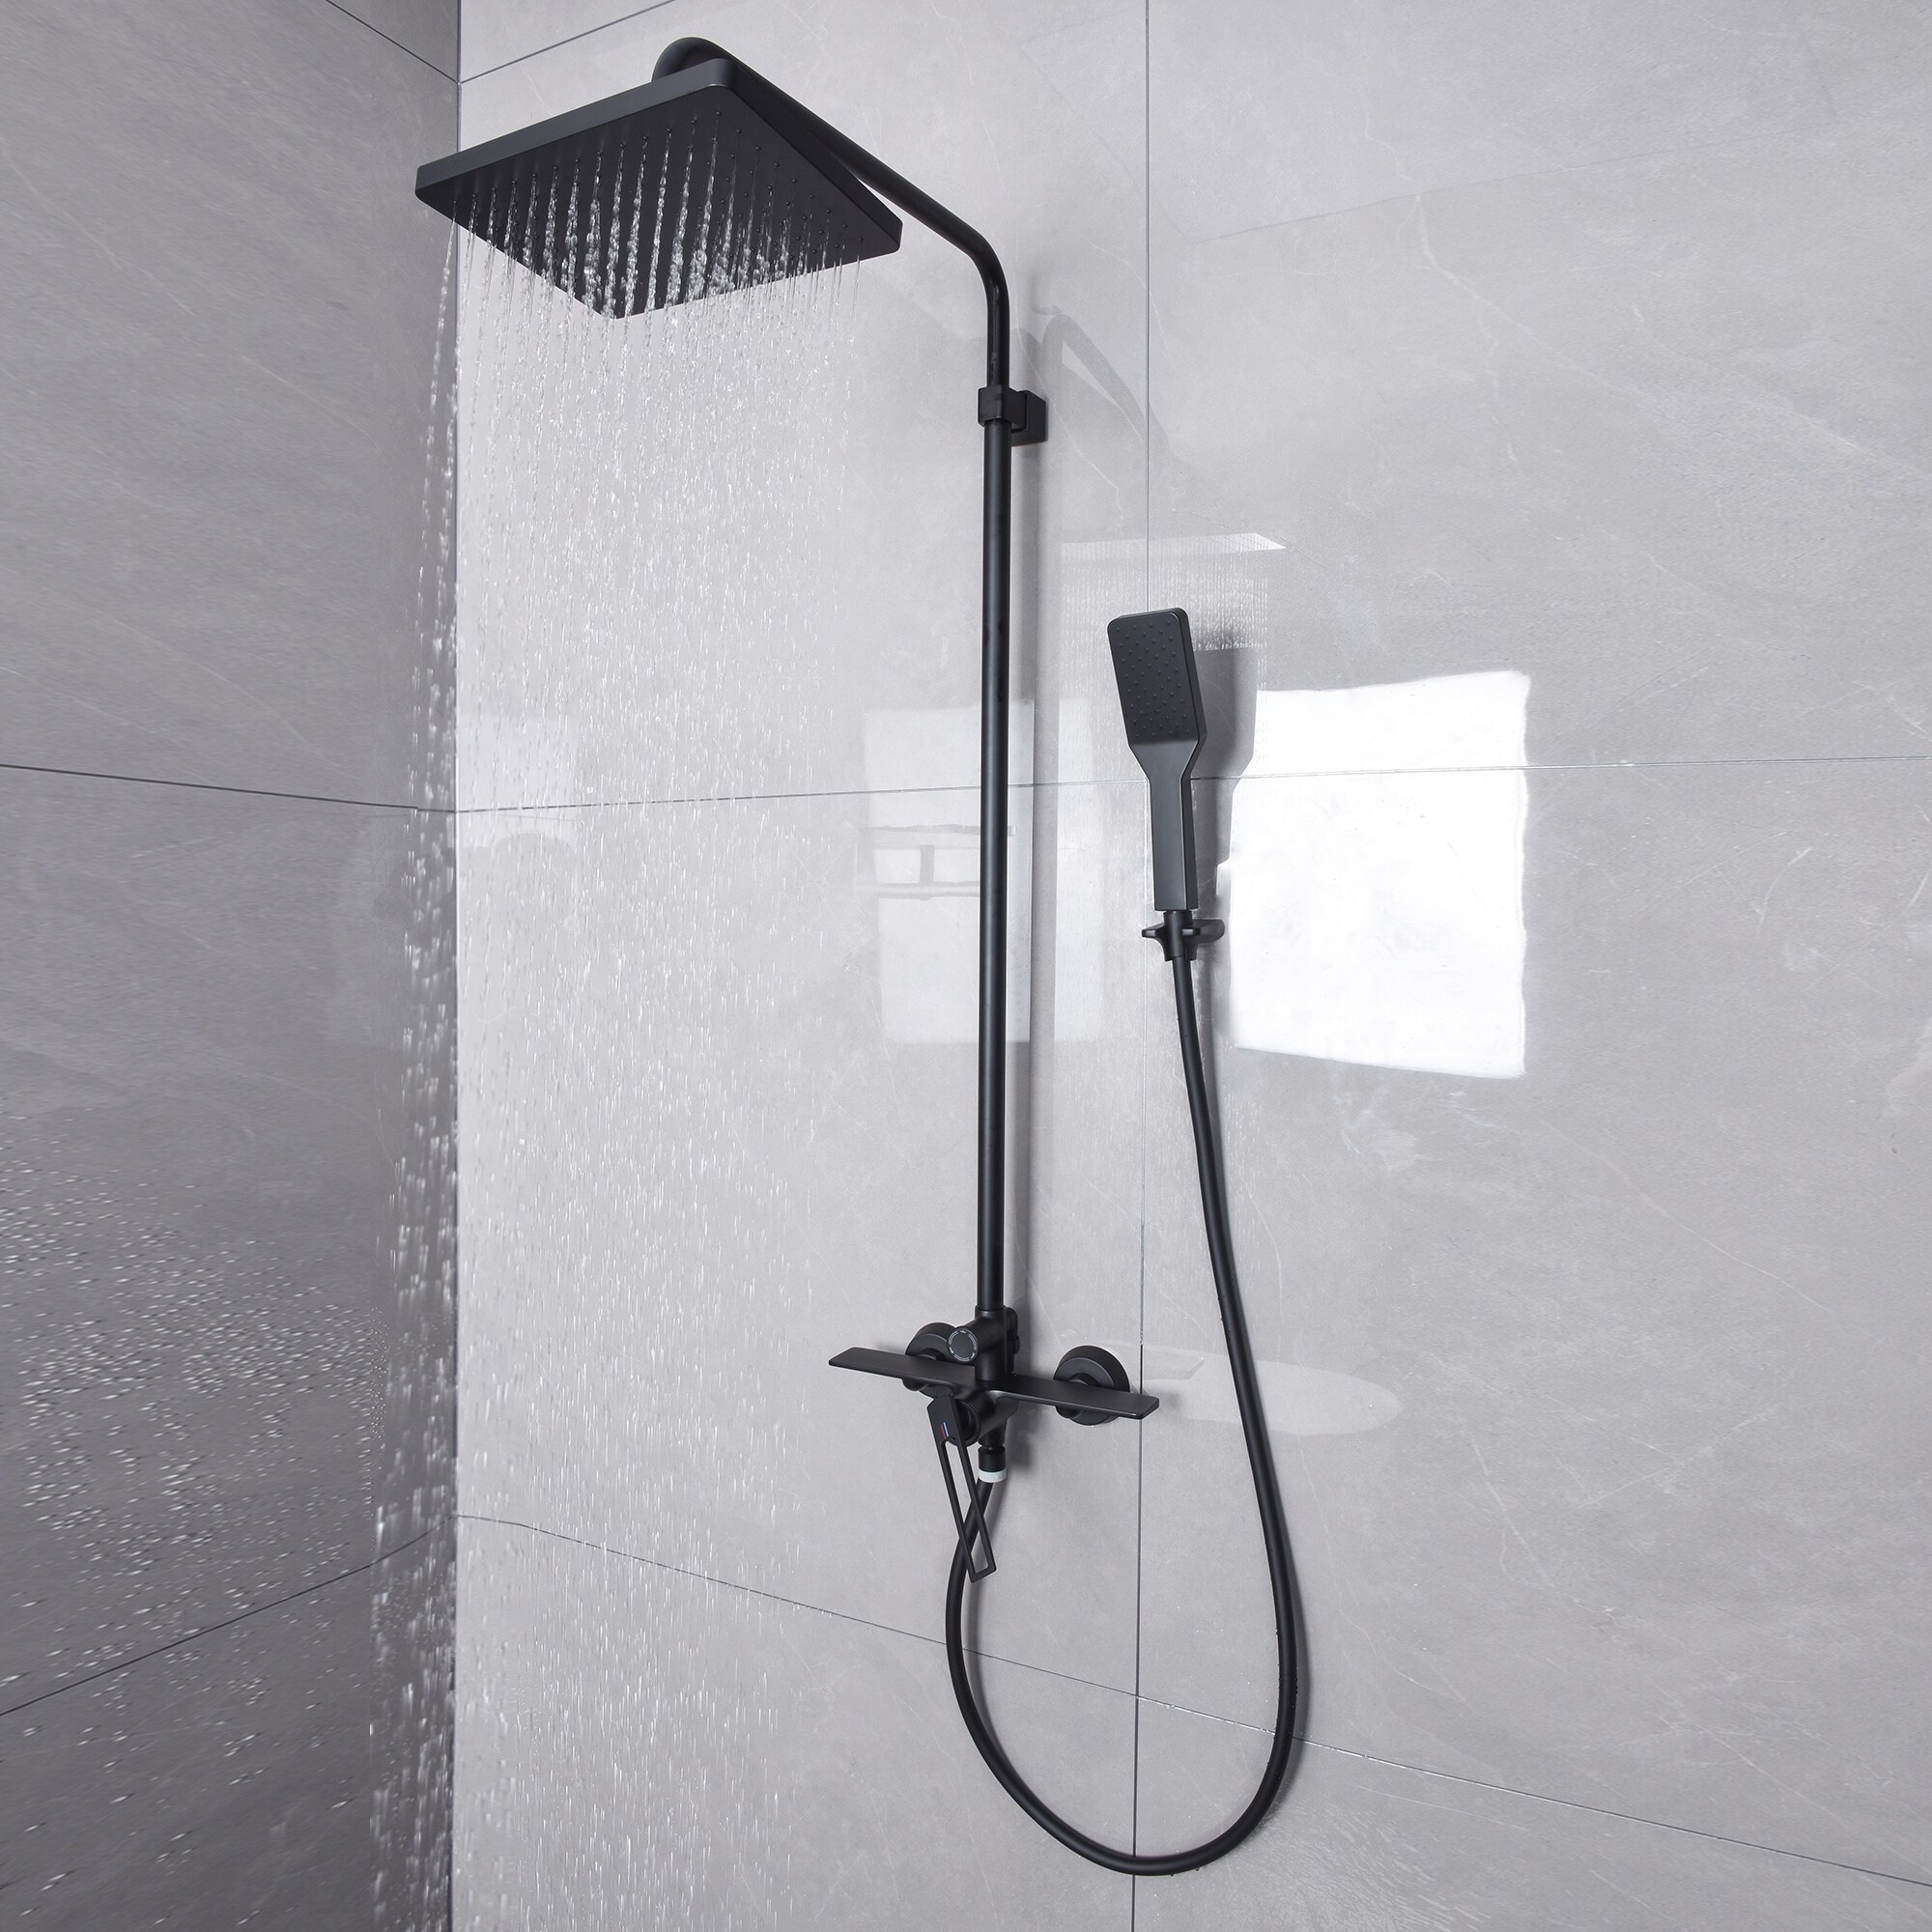 https://ak1.ostkcdn.com/images/products/is/images/direct/8418e9067c23990c3e9470bb8498972ac9b9c1d4/Wall-Mounted-Complete-Shower-System-with-Rough-In-Valve.jpg